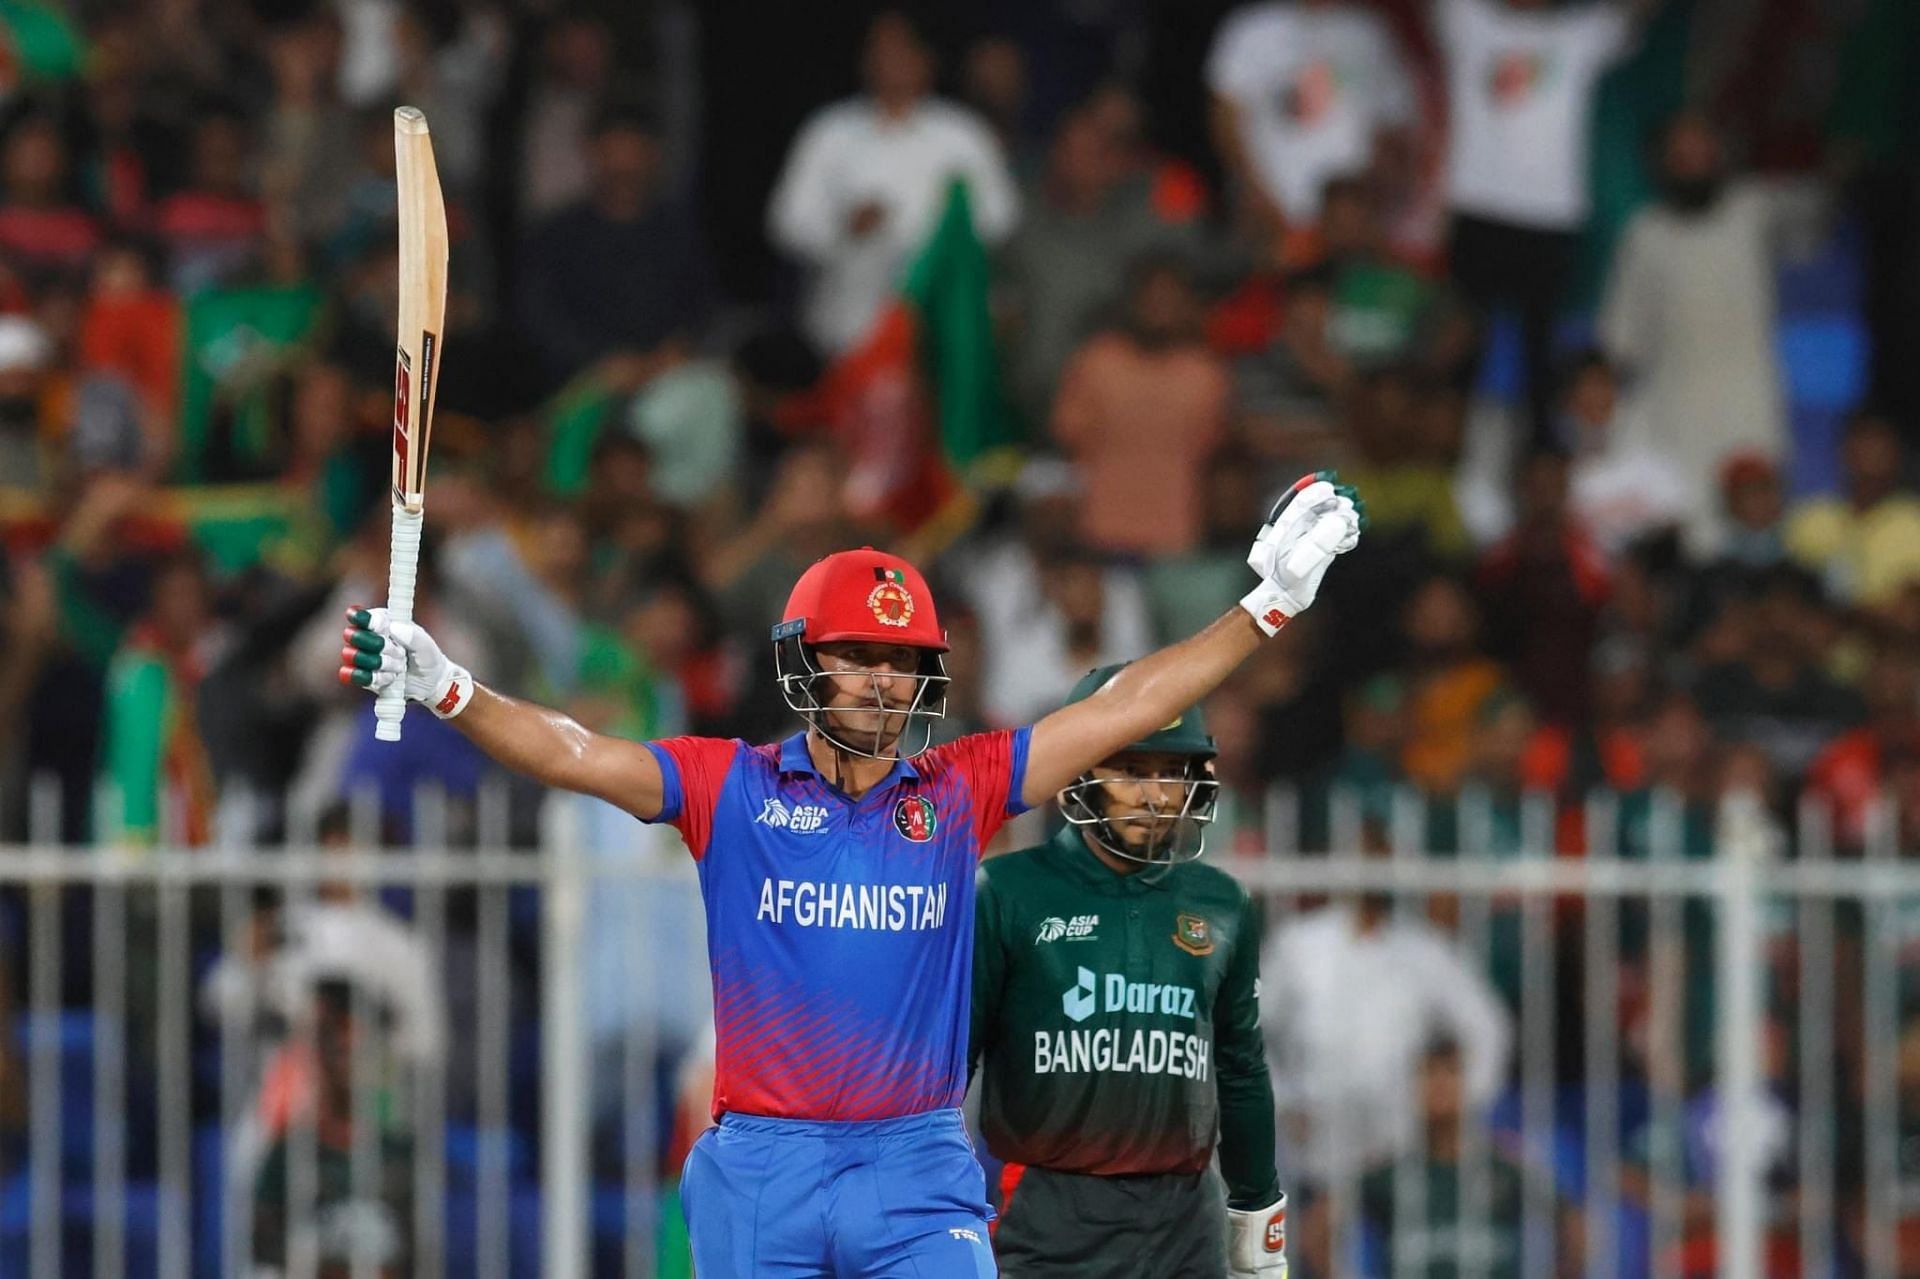 Najibullah Zadran played a fantastic innings to power Afghanistan to a win 